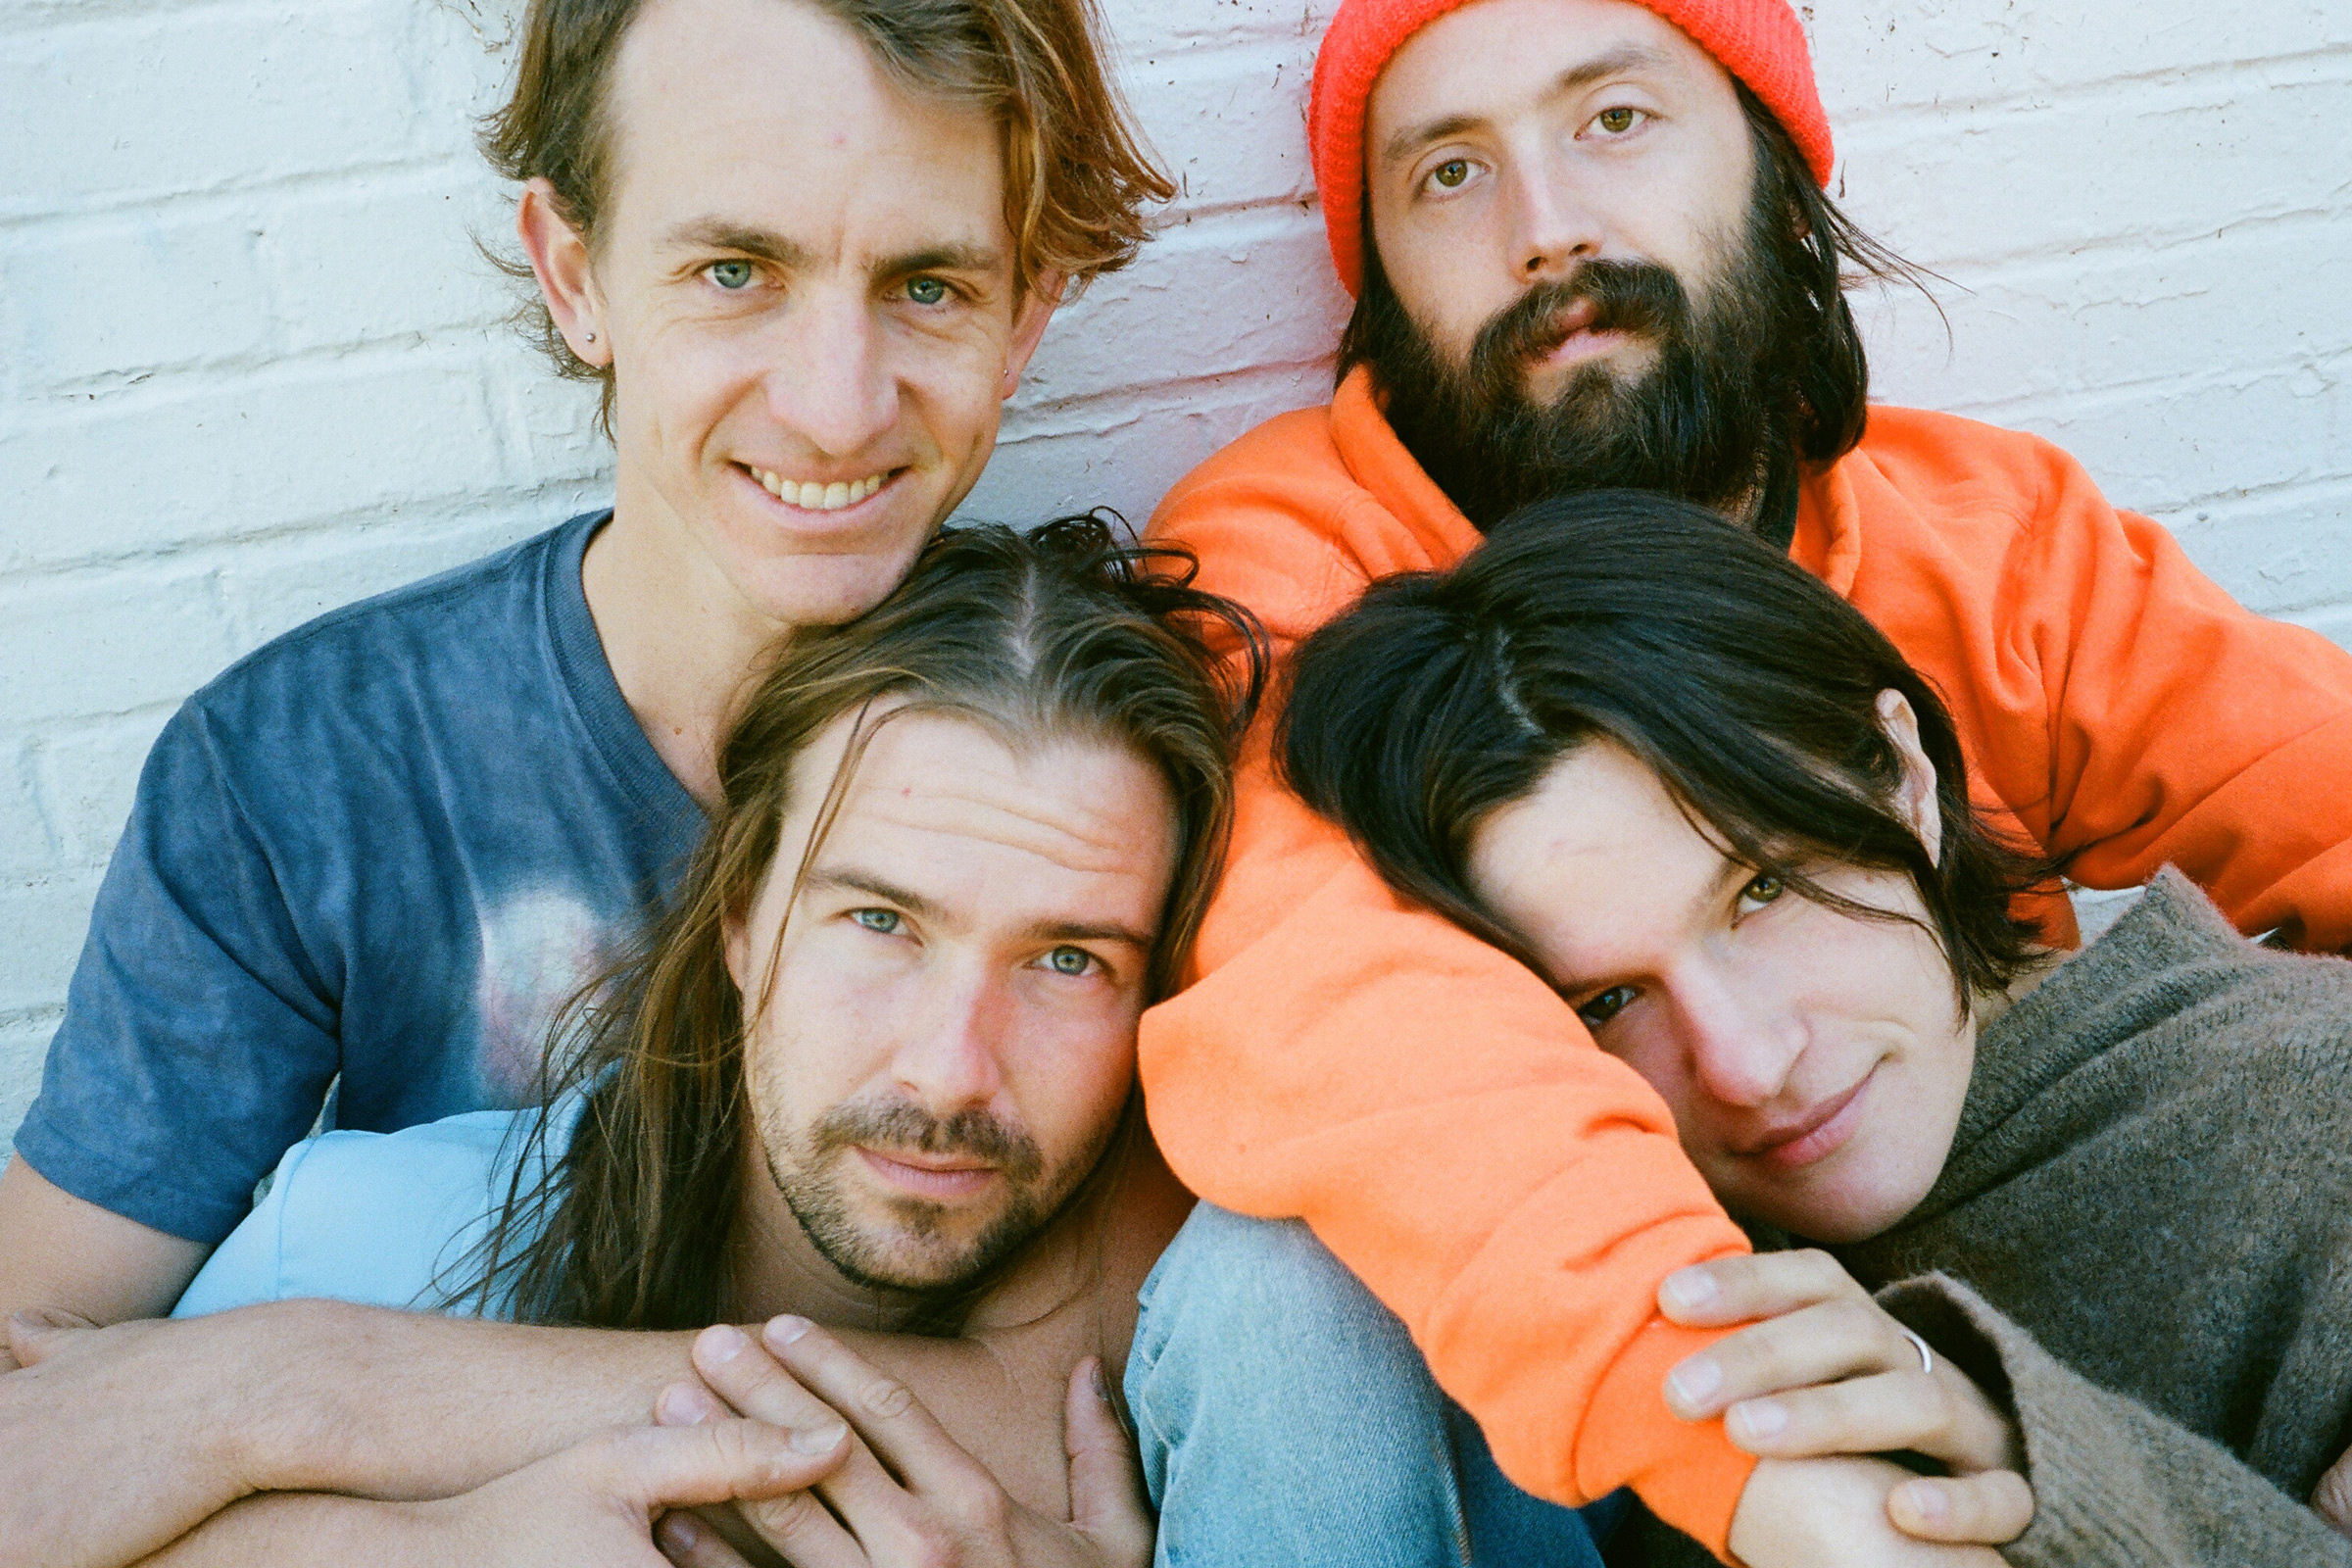 Big Thief band, Transcendent music, Rolling Stone feature, 2400x1600 HD Desktop